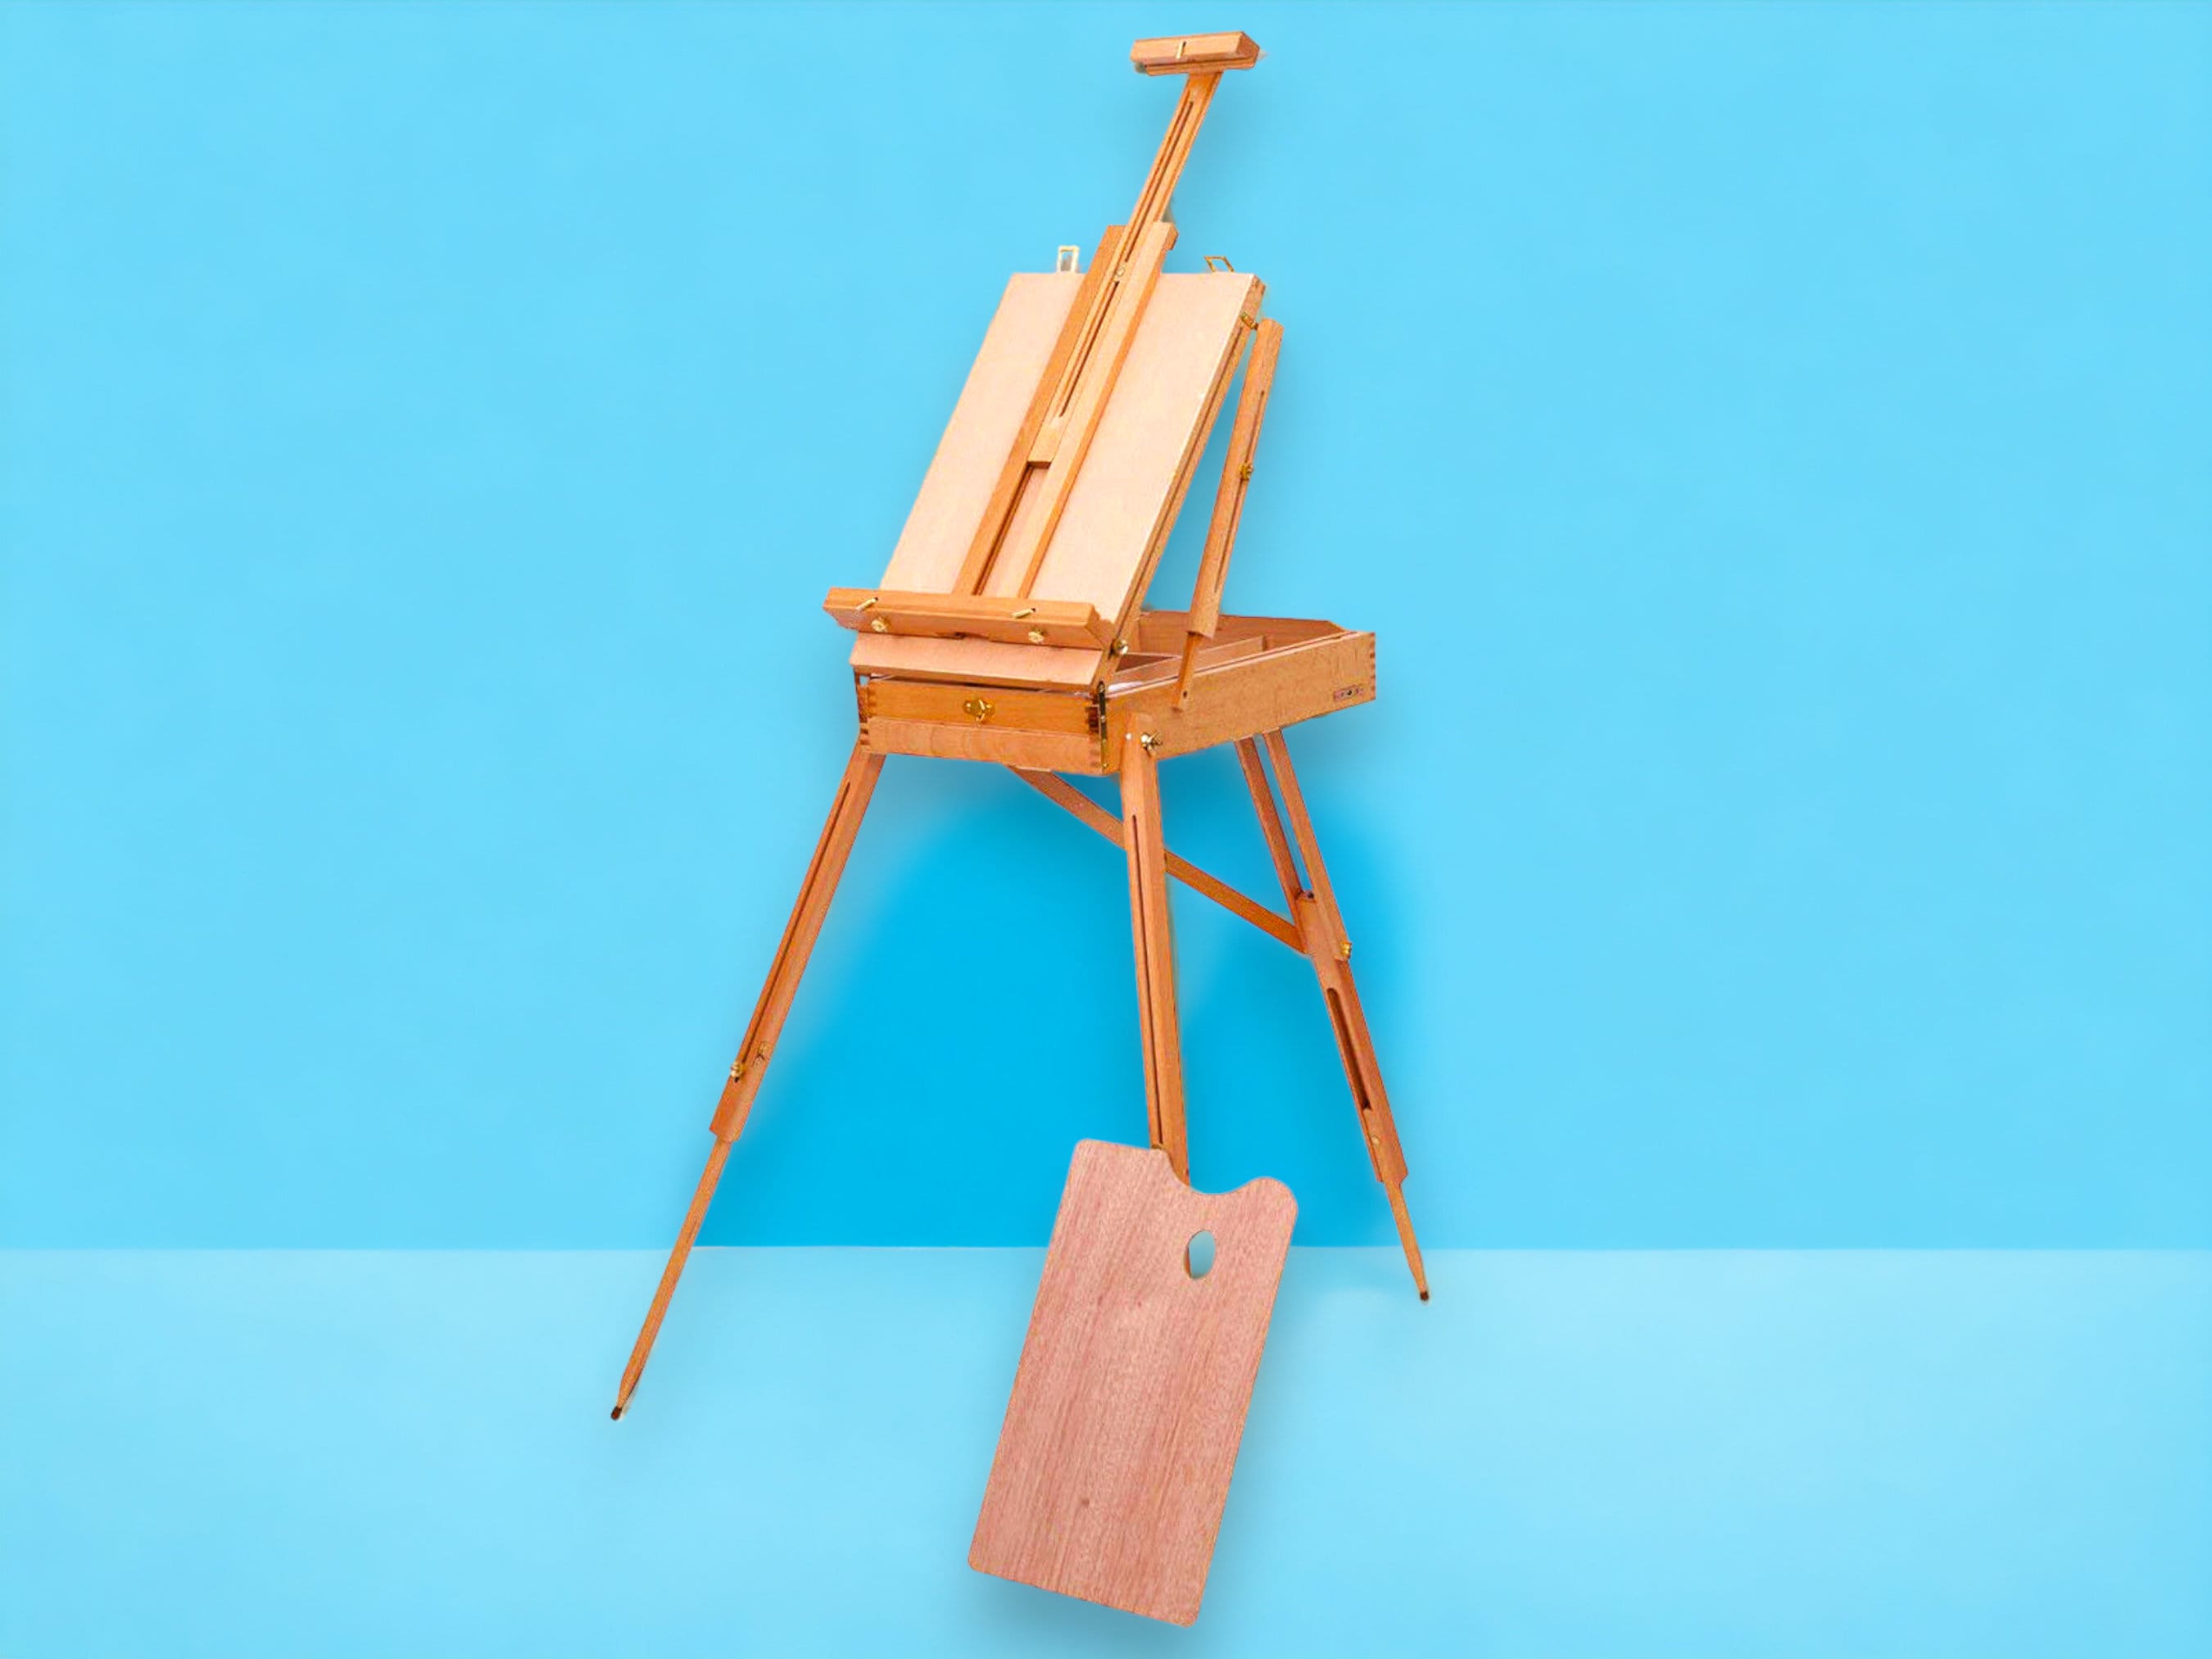 MEEDEN meeden french easel,beech wood sketch easel box with foldable  legs,drawer storage and palette tray,portable artist easel for